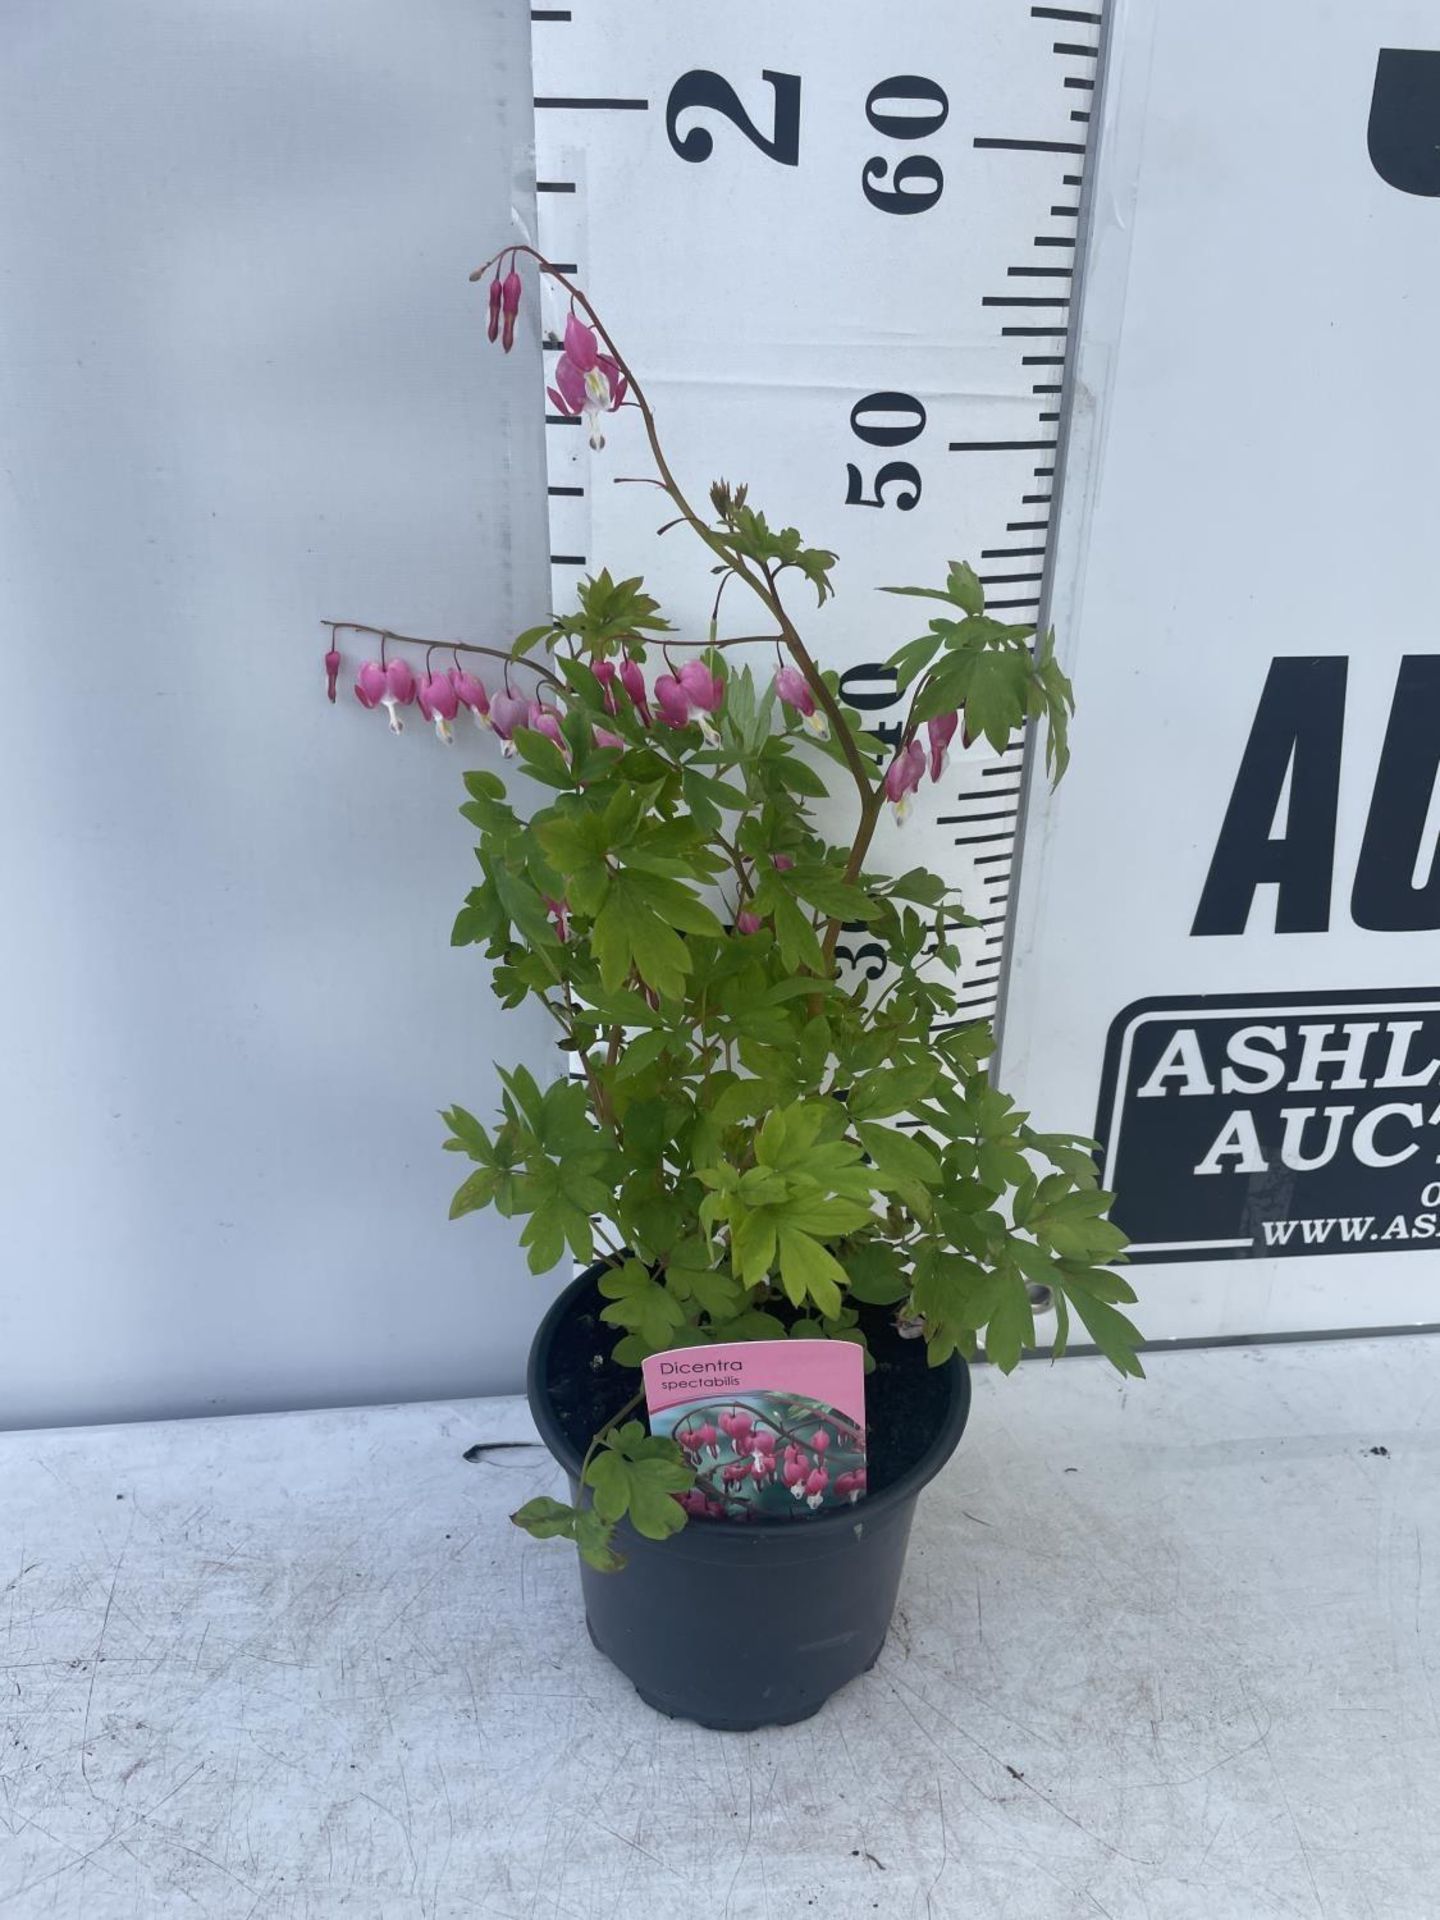 SIX DICENTRA SPECTABILIS BLEEDING HEART 50CM TALL IN 2 LTR POTS TO BE SOLD FOR THE SIX PLUS VAT - Image 5 of 11